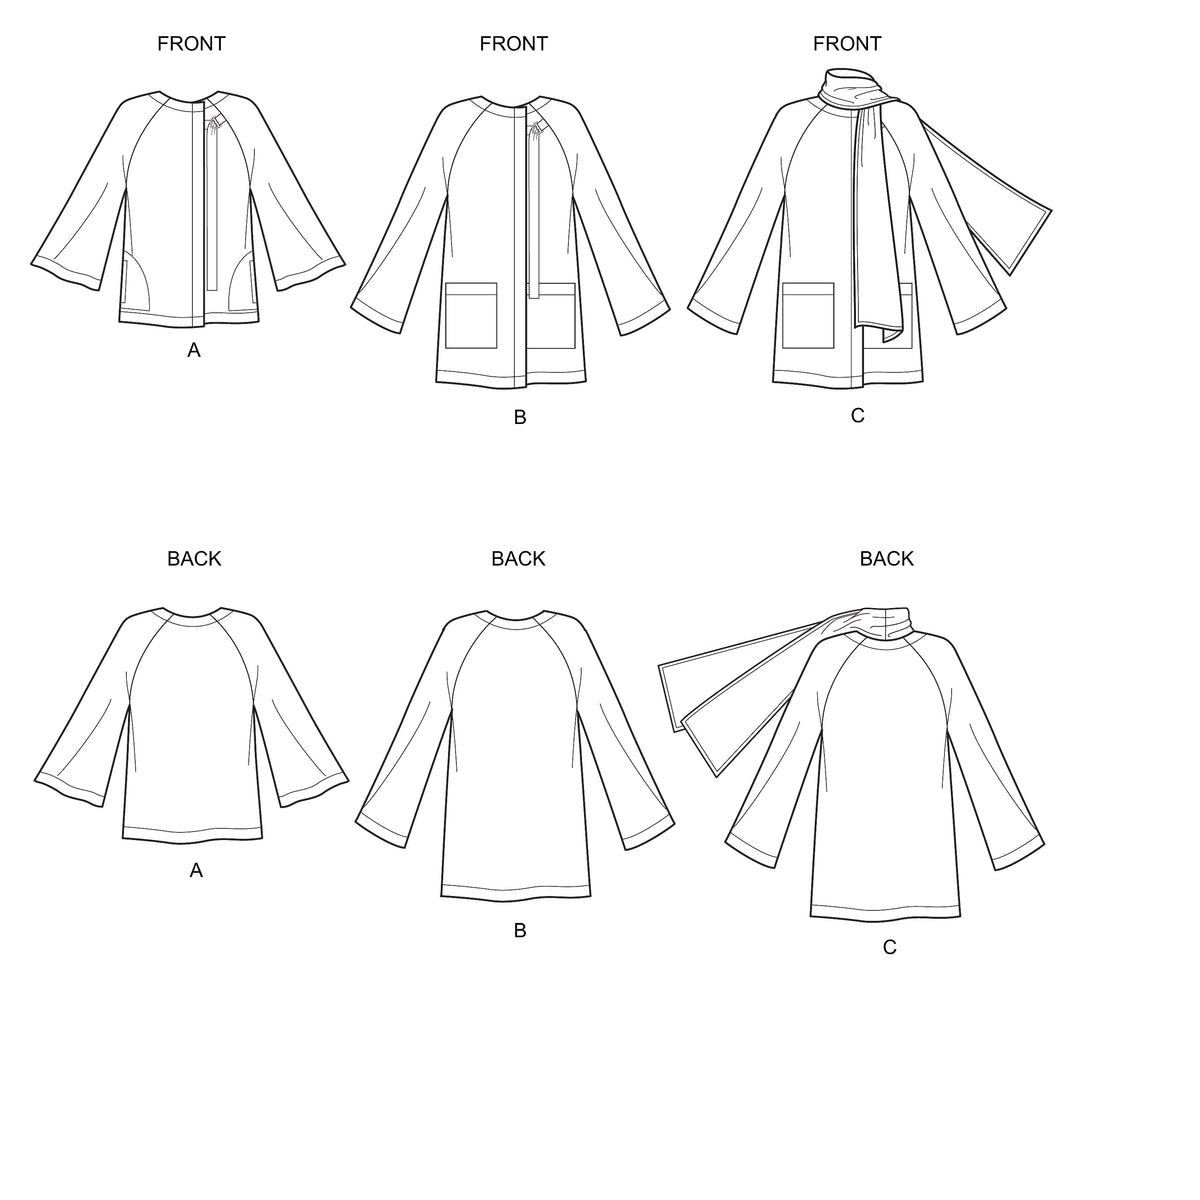 6639 New Look Sewing Pattern N6639 Misses' Poncho and Jackets